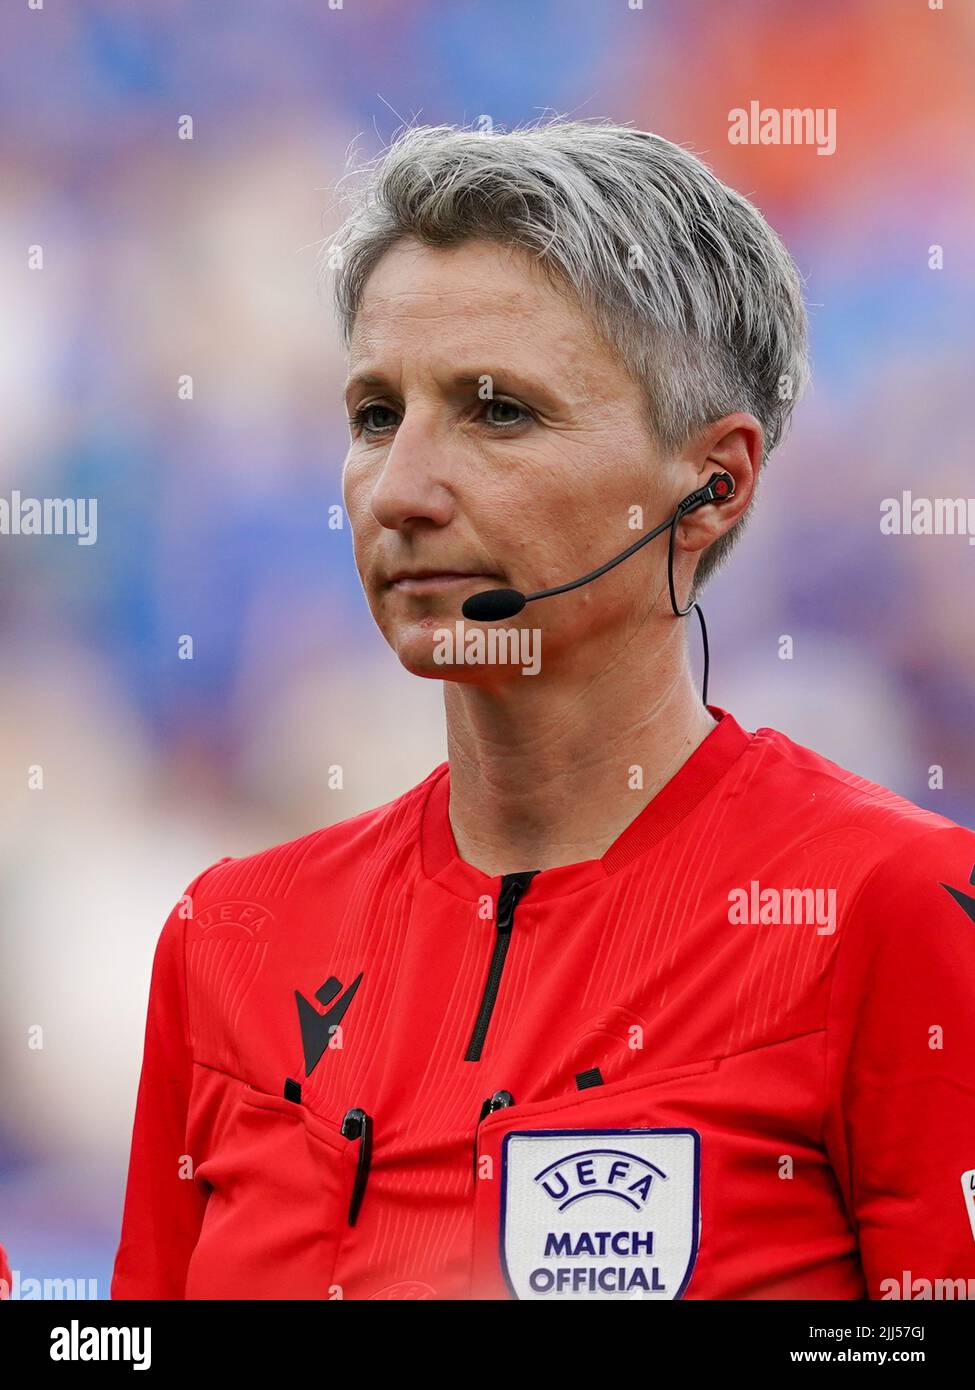 Rotherham, UK. 18th July, 2022. Referee Jana Adamkova (CZE) during the UEFA Womens Euro 2022 group D football match between Iceland and France at New York Stadium in Rotherham, England. (Foto: Daniela Porcelli/Sports Press Photo/C - ONE HOUR DEADLINE - ONLY ACTIVATE FTP IF IMAGES LESS THAN ONE HOUR OLD - Alamy) Credit: SPP Sport Press Photo. /Alamy Live News Stock Photo